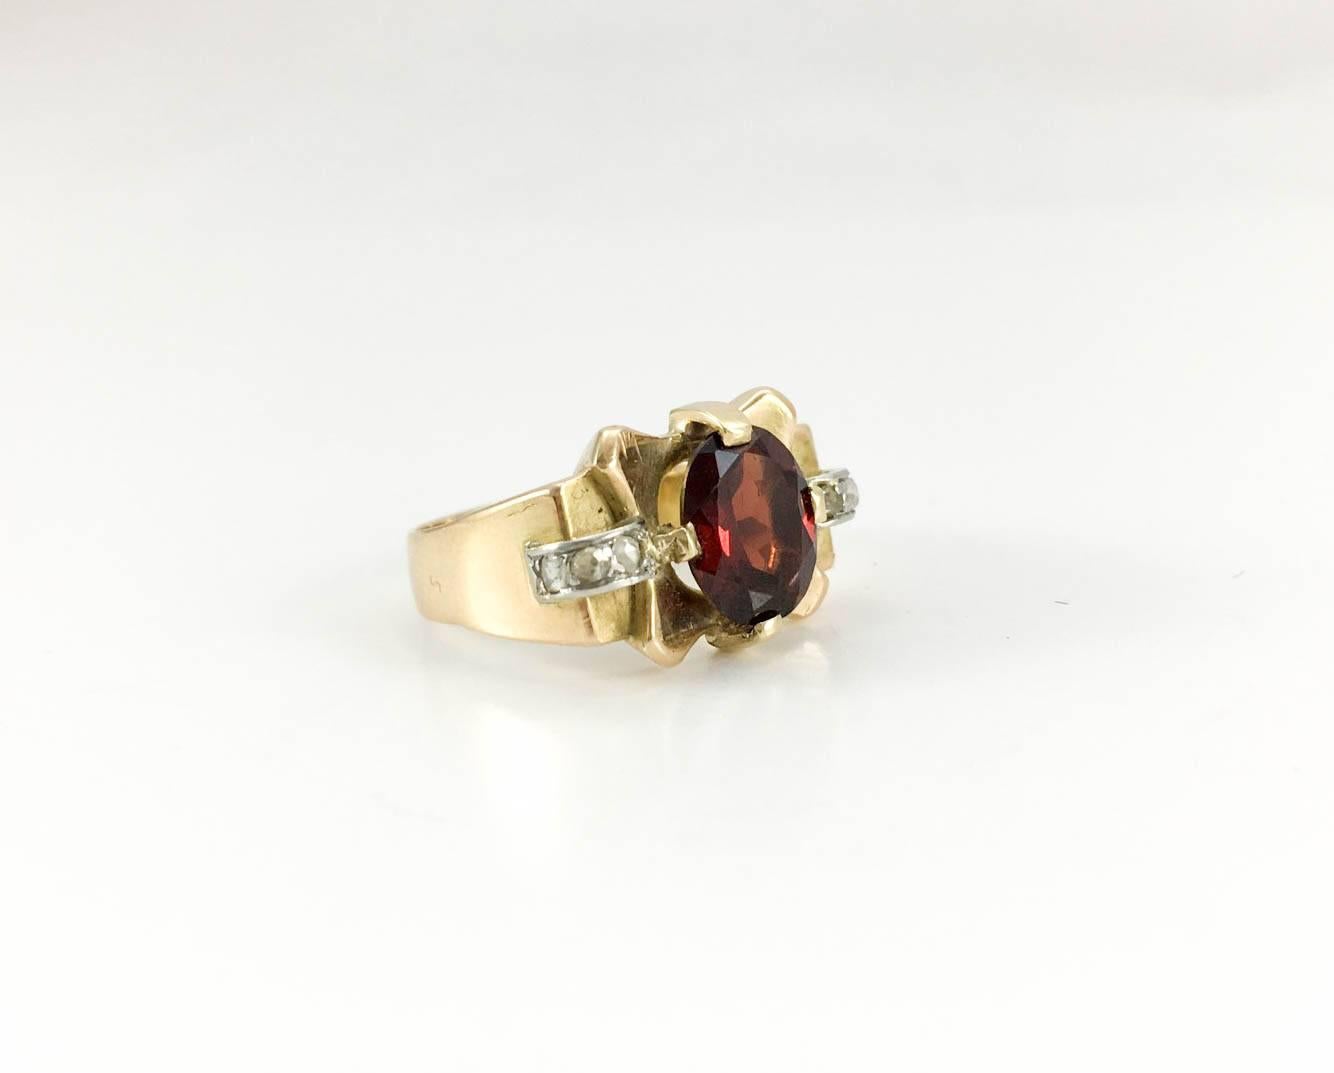 Garnet, Gold and Diamond Cocktail Ring - 1940s In Excellent Condition For Sale In London, Chelsea